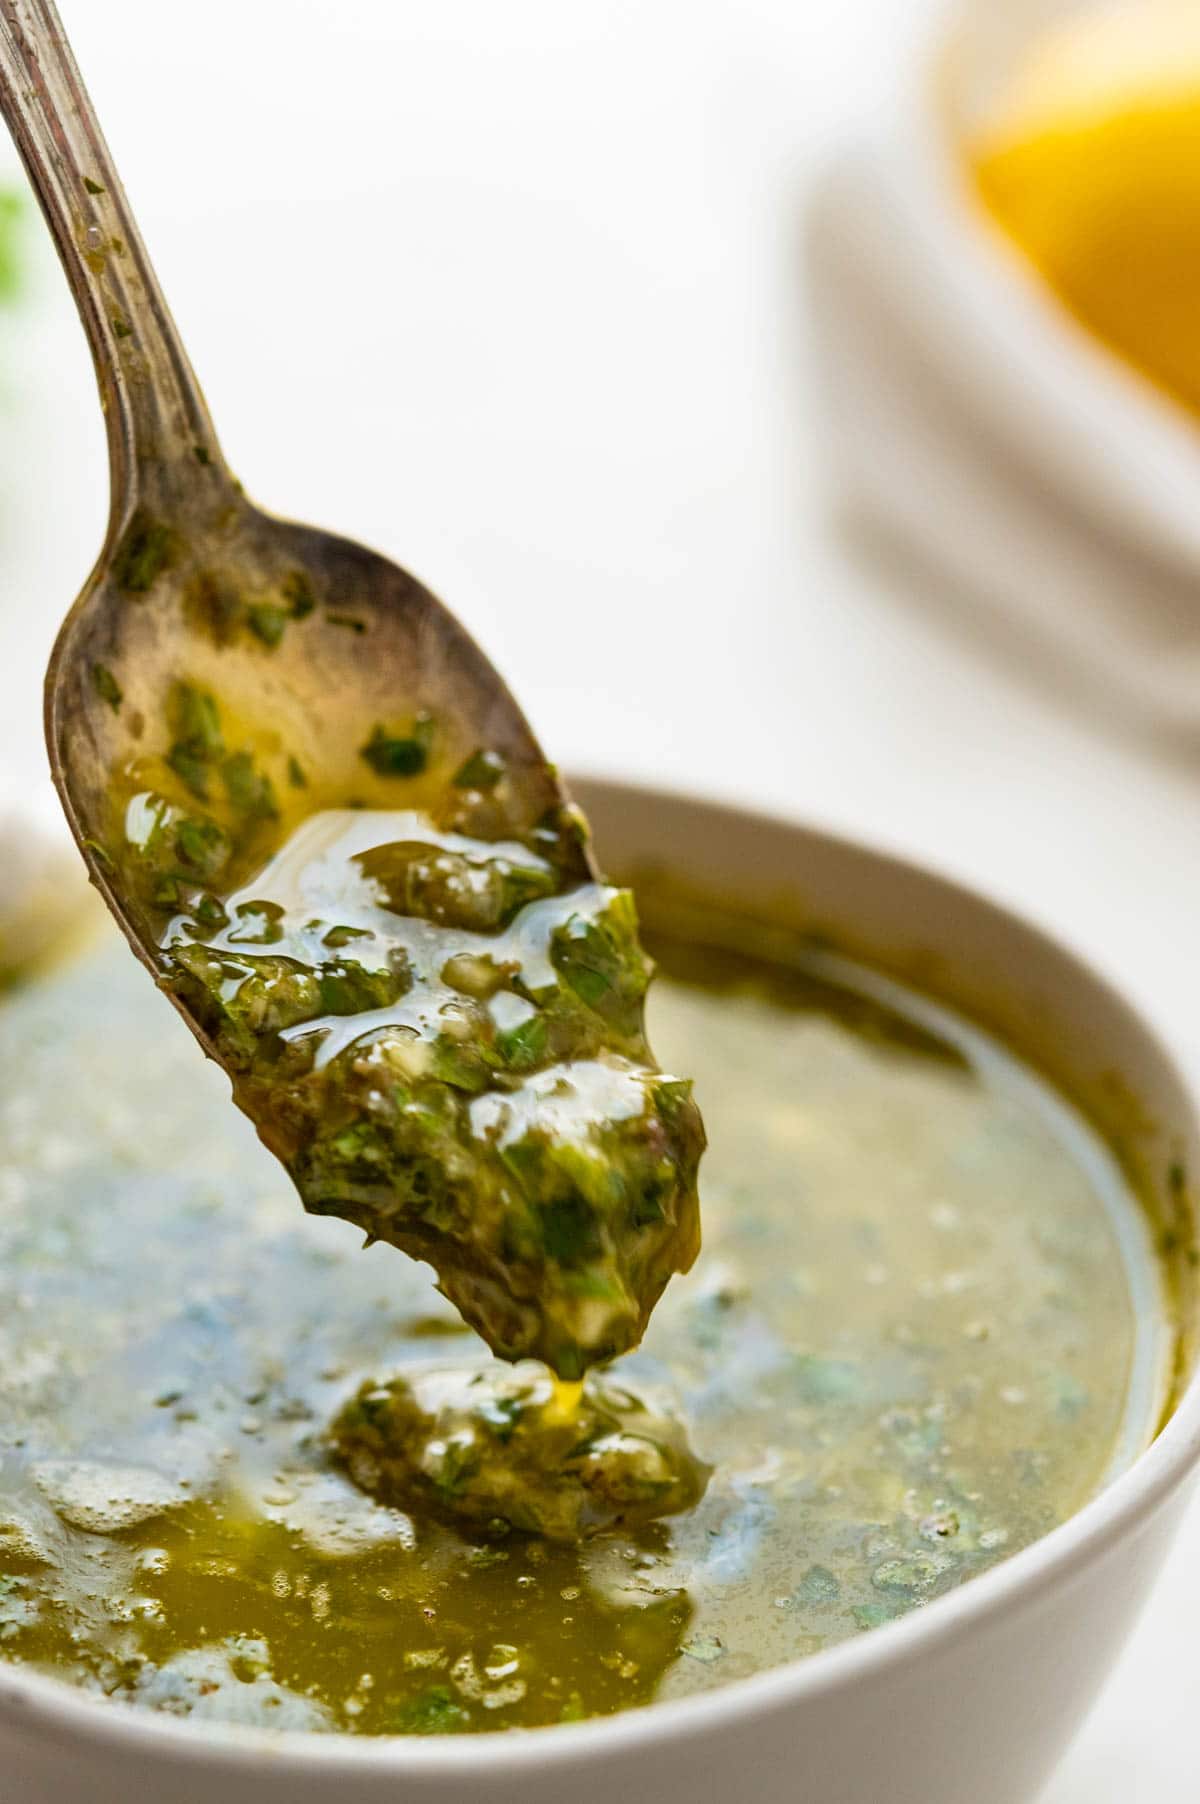 spooning up Italian Salsa verde with a spoon.